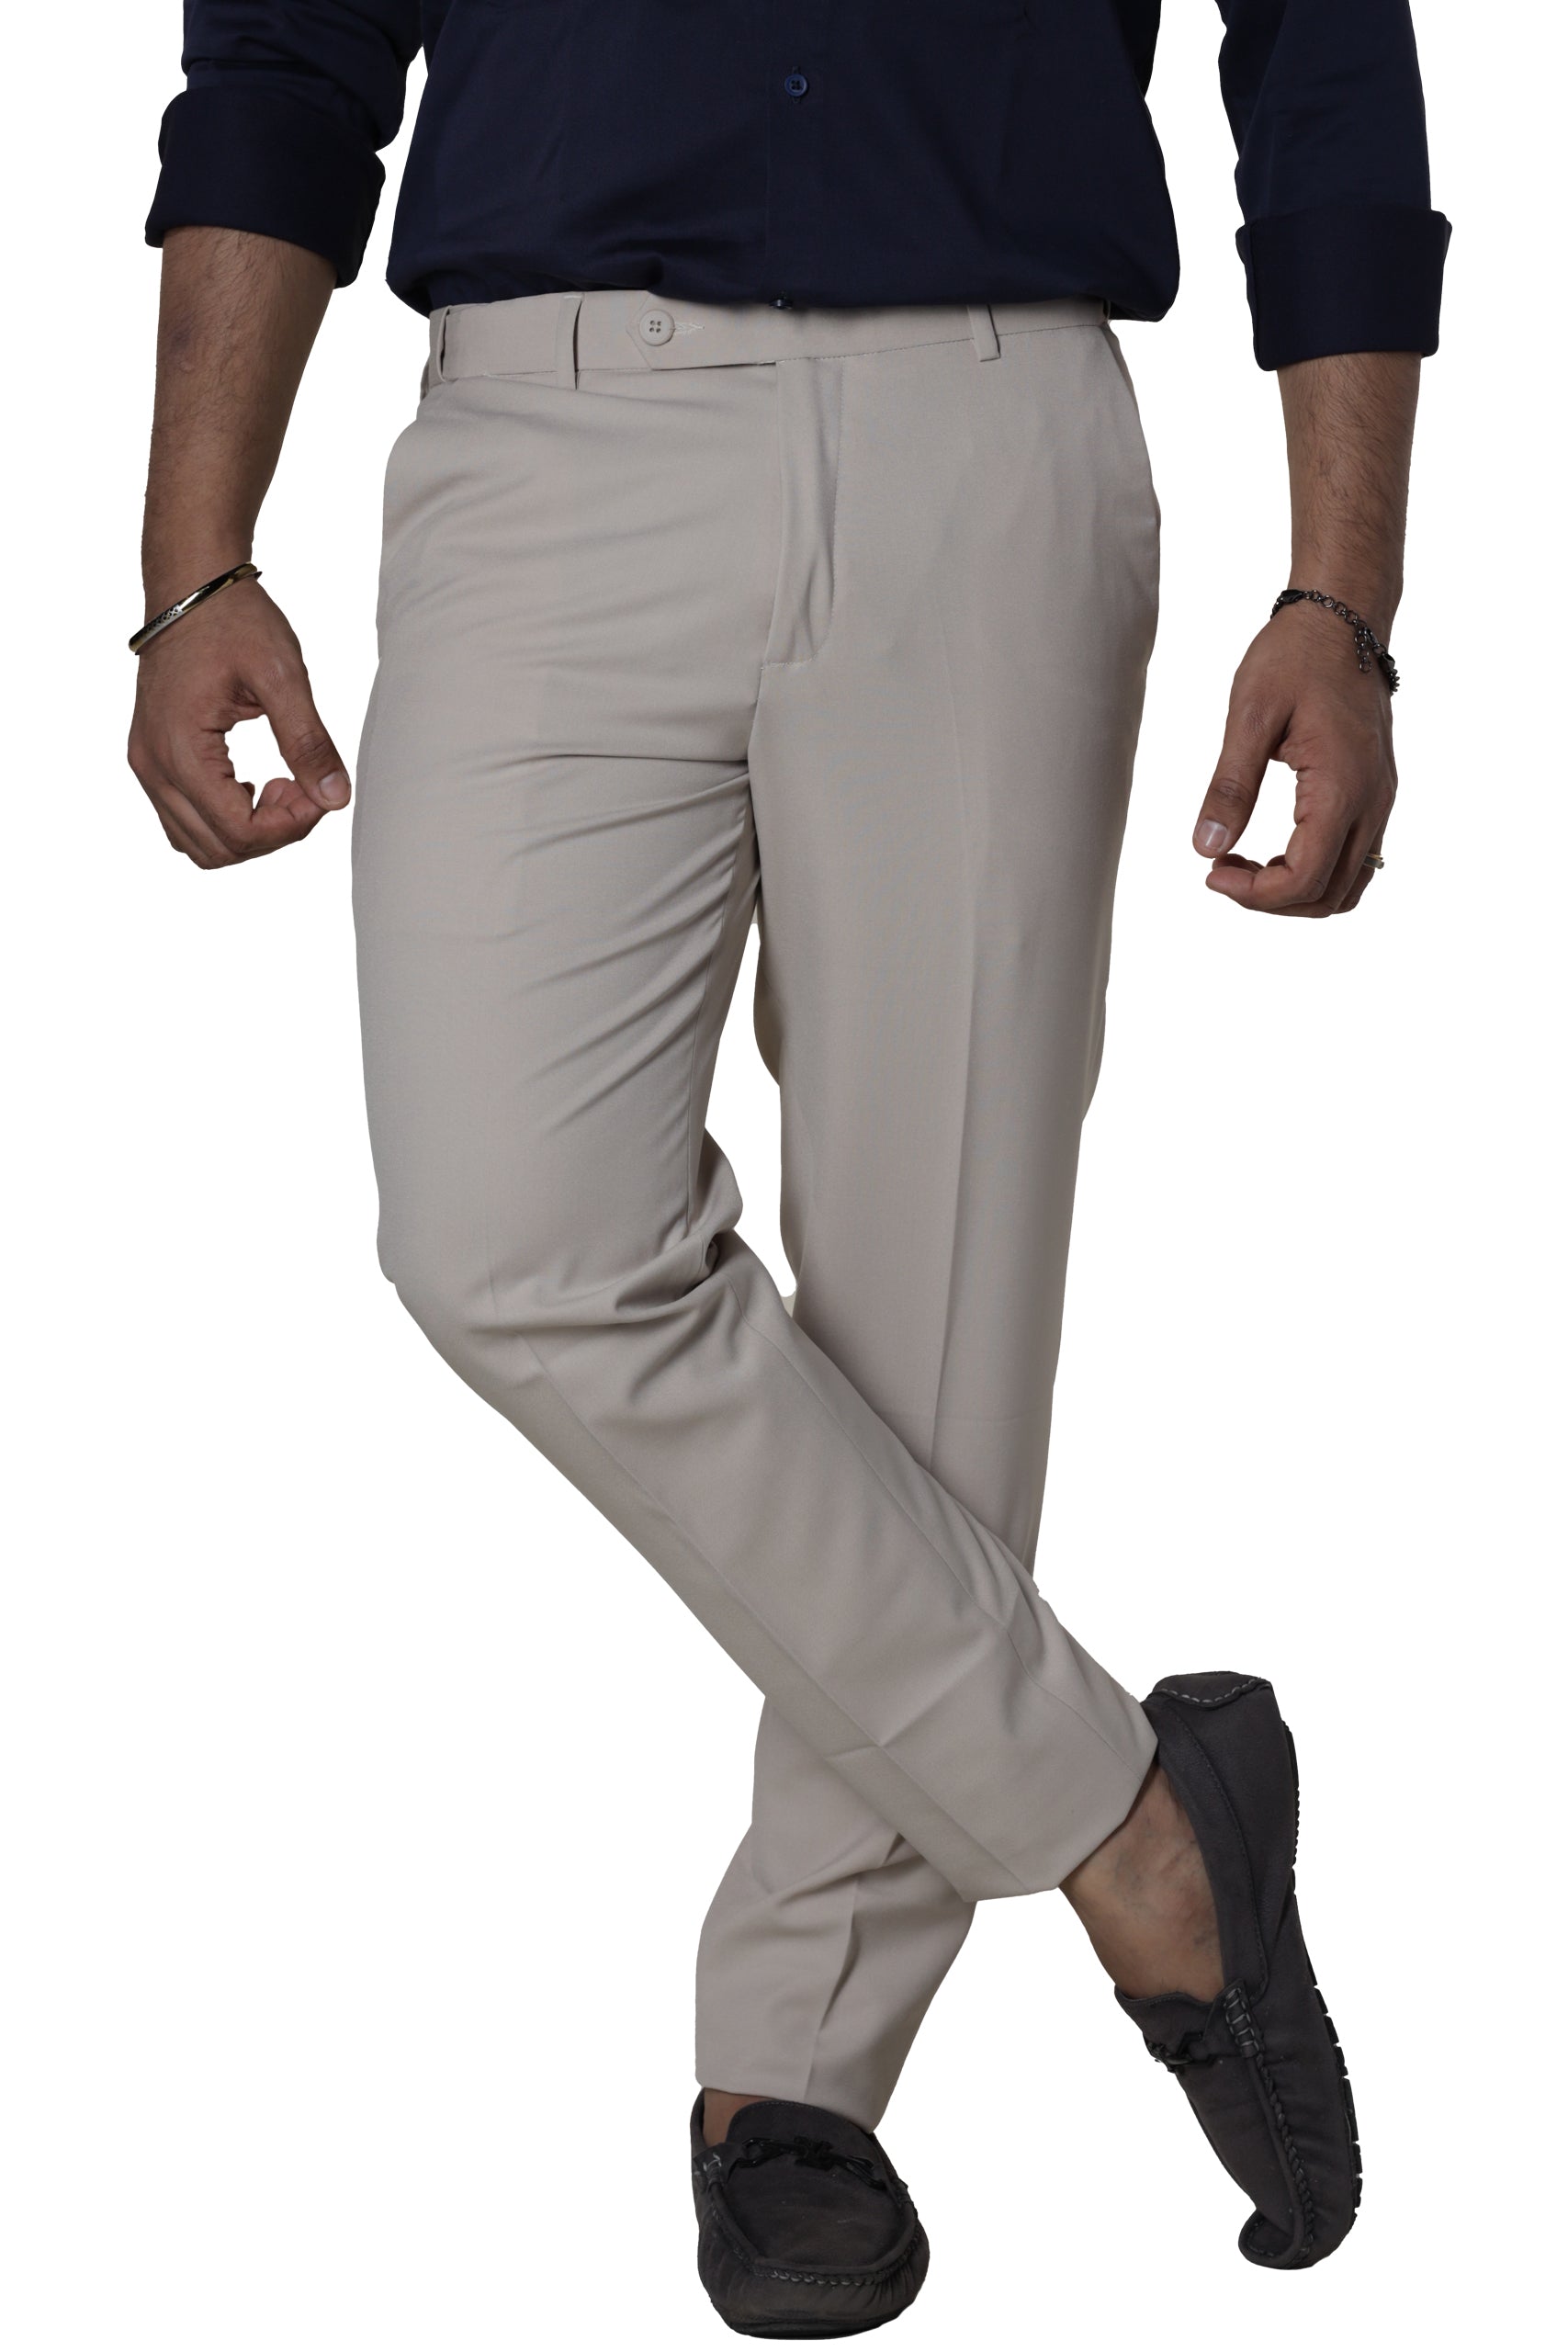 Buy Olive Trousers  Pants for Men by UNITED COLORS OF BENETTON Online   Ajiocom